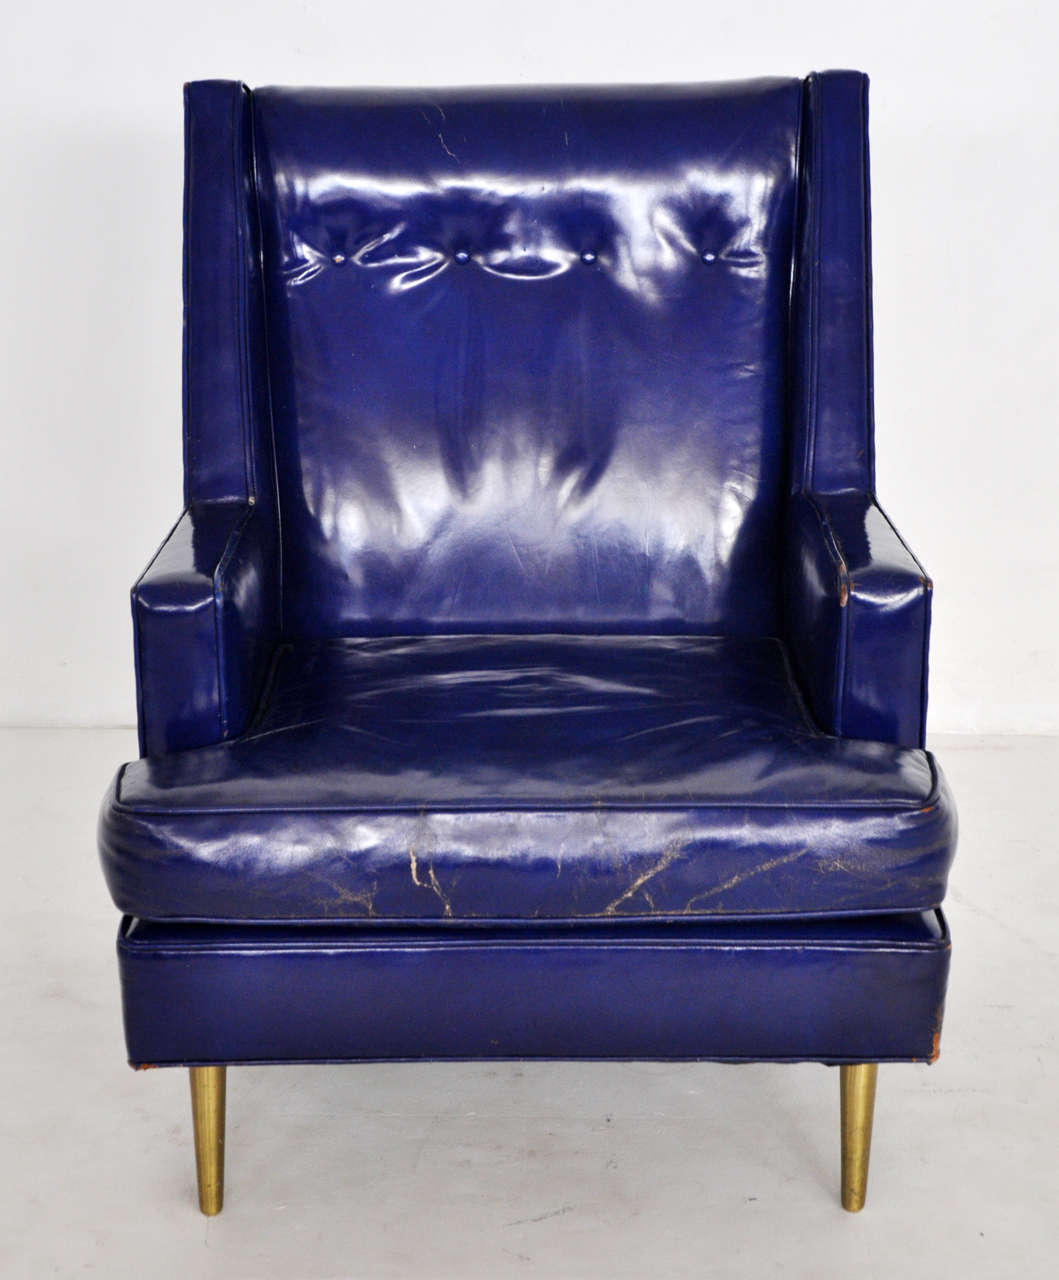 Lounge chair designed by Edward Wormley for Dunbar. Original blue leather over brass legs.